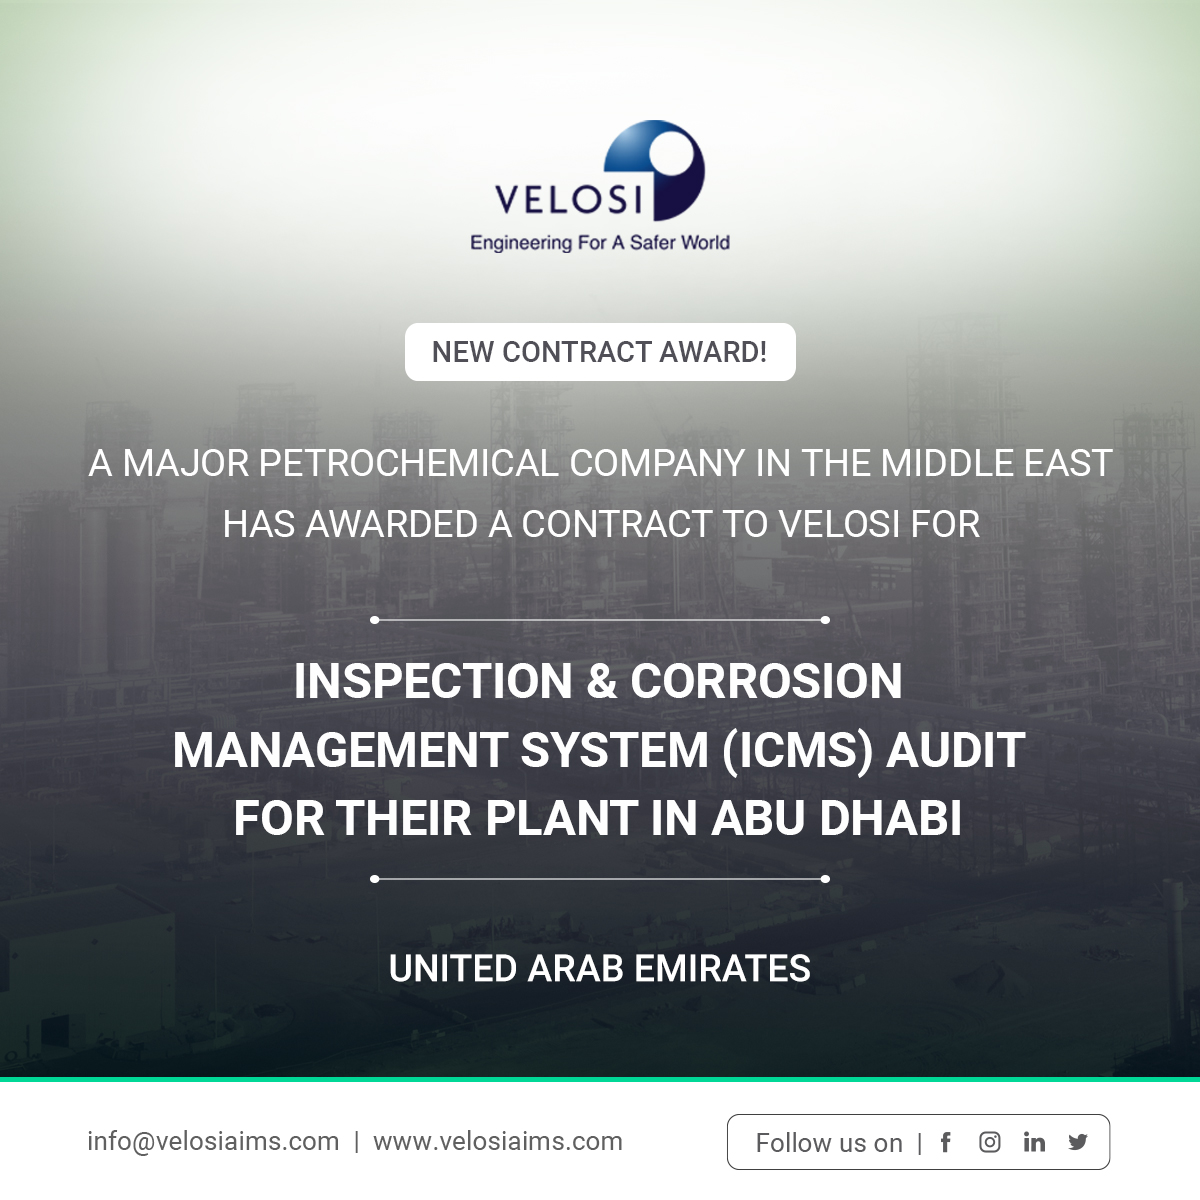 Contract Award-Inspection & Corrosion Management System (ICMS)